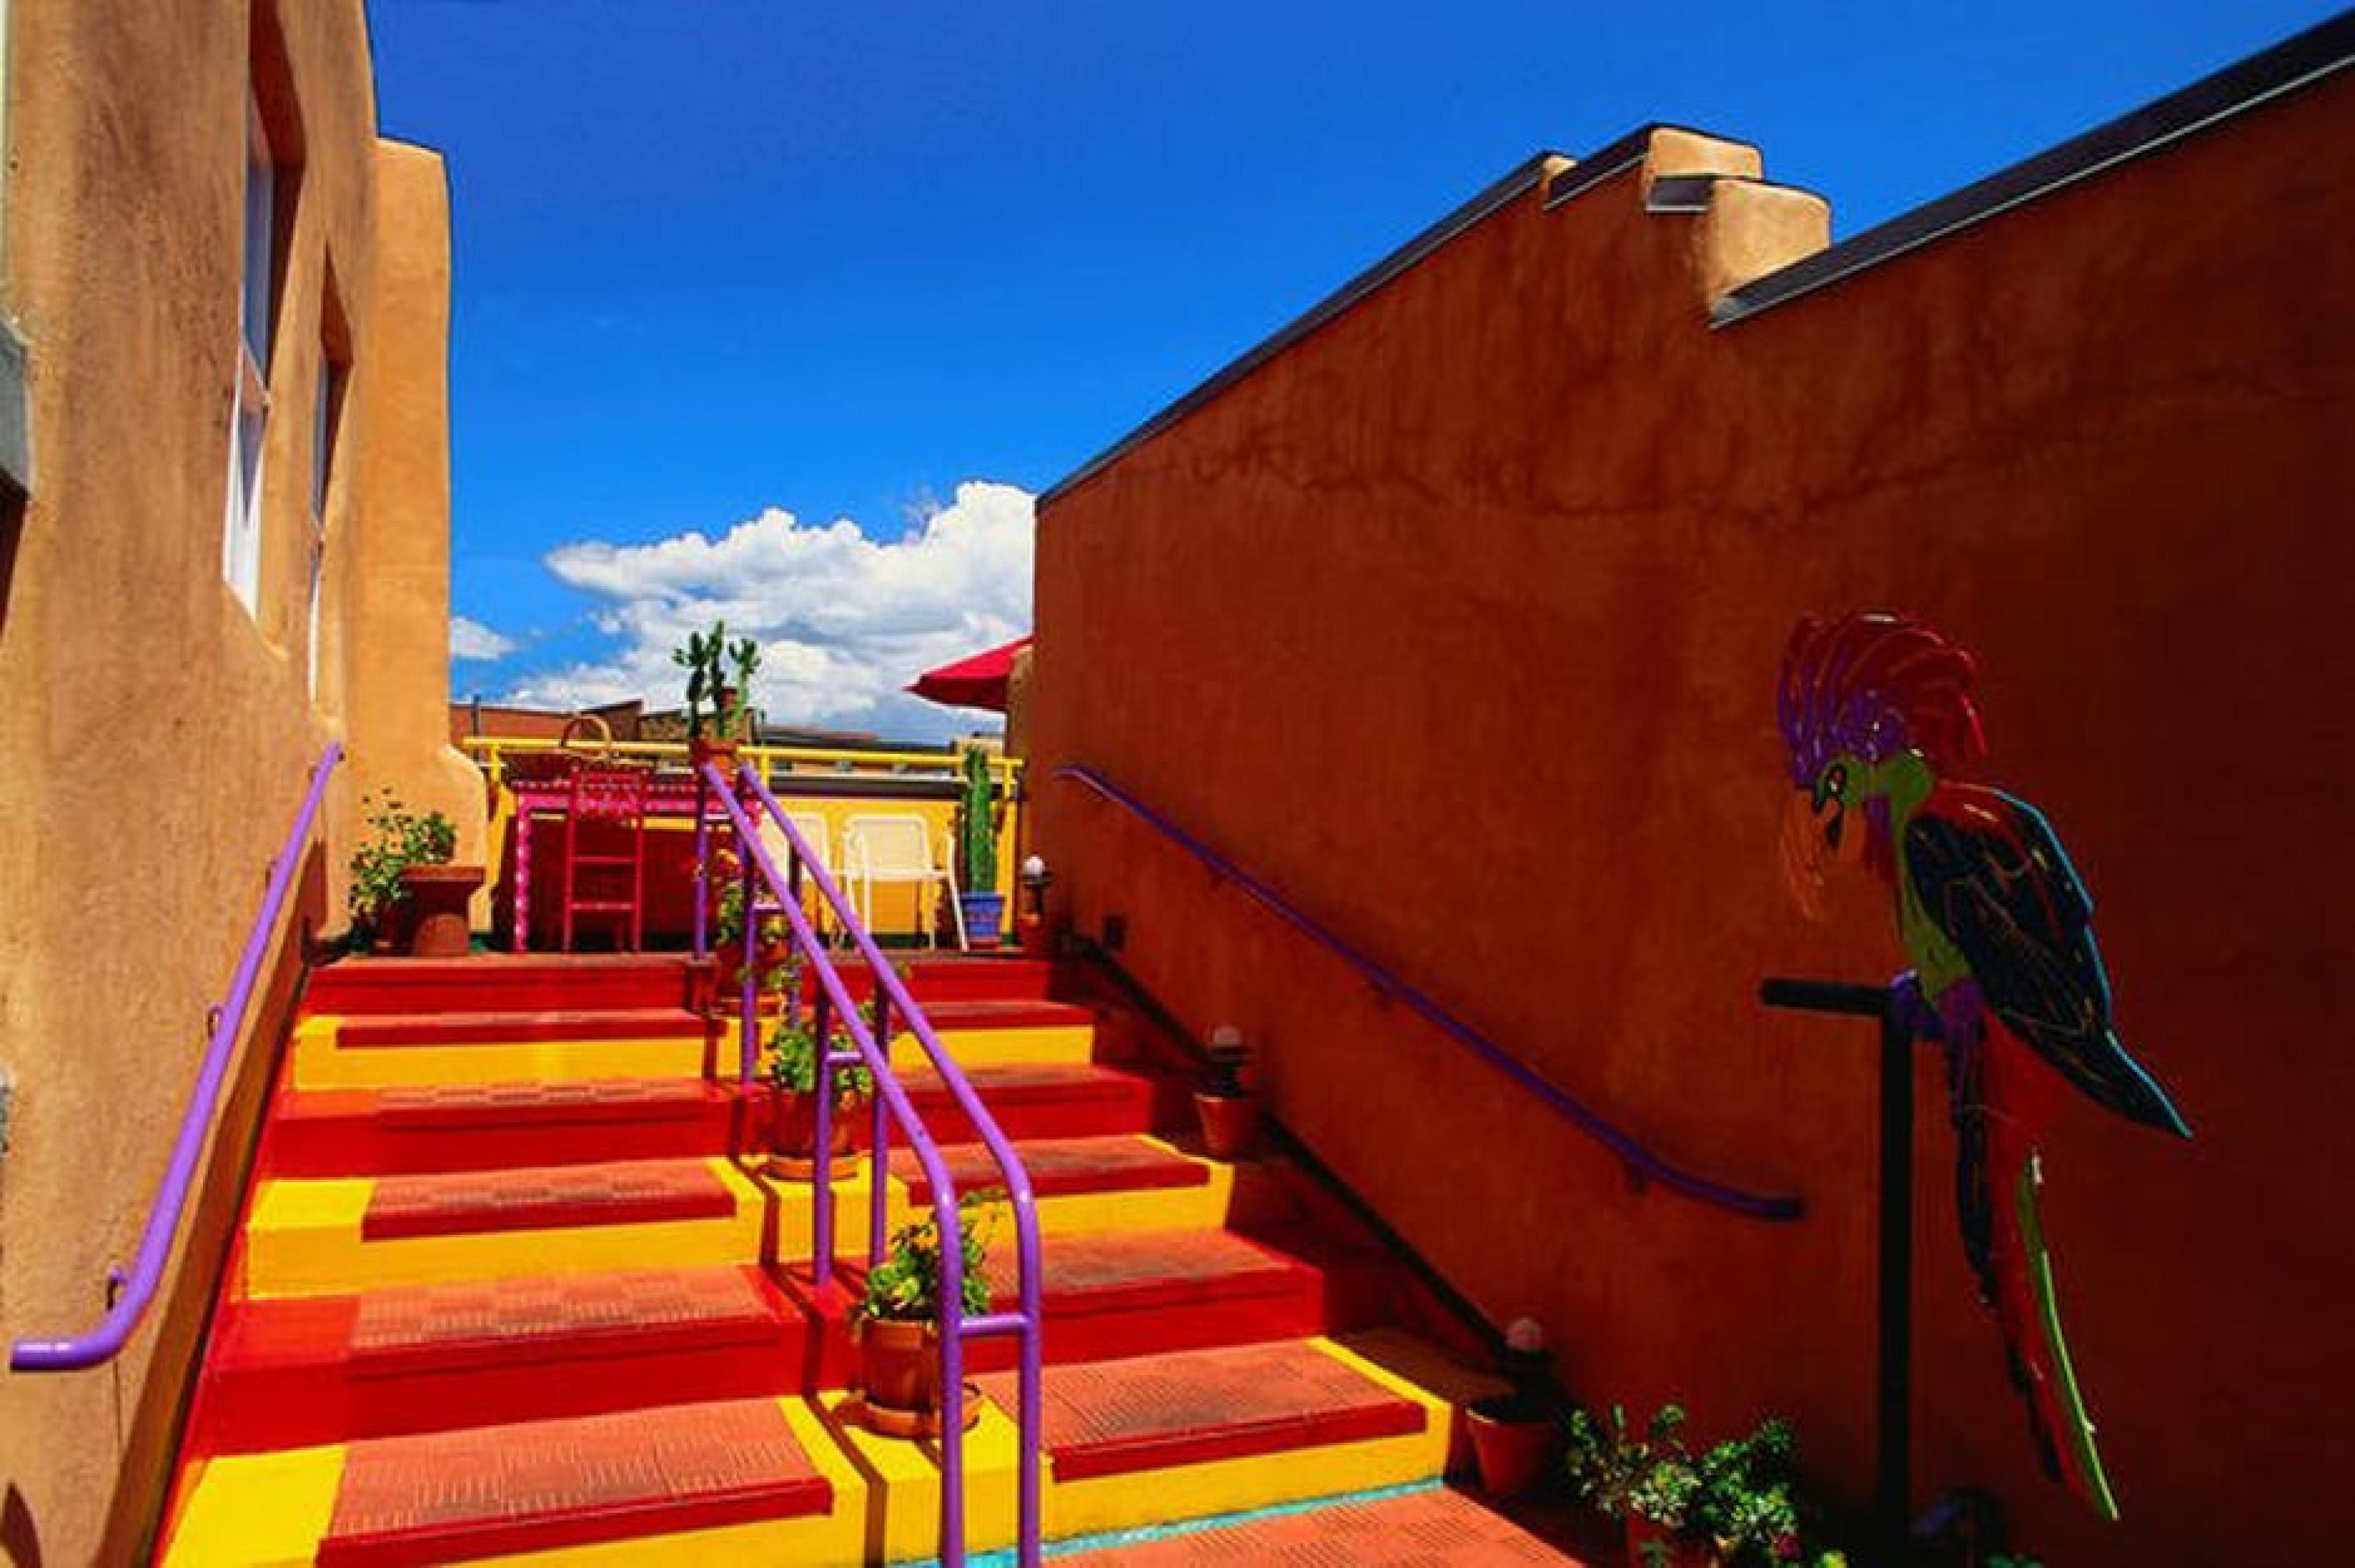 Stairs at Coyote Café, Santa Fe, American West